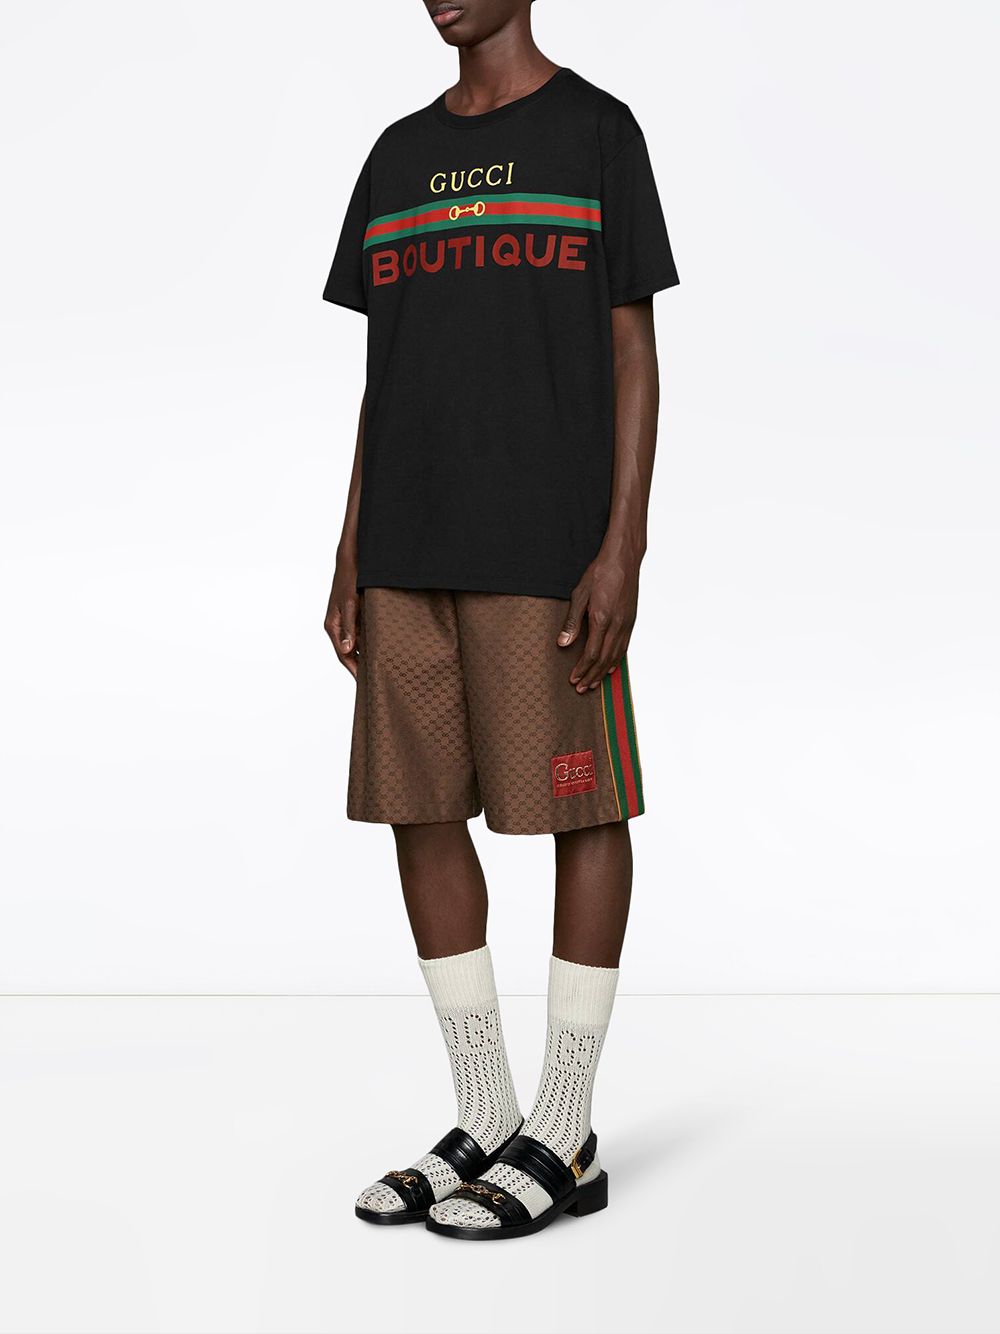 Shop Gucci Gucci boutique print T-shirt with Express Delivery - FARFETCH